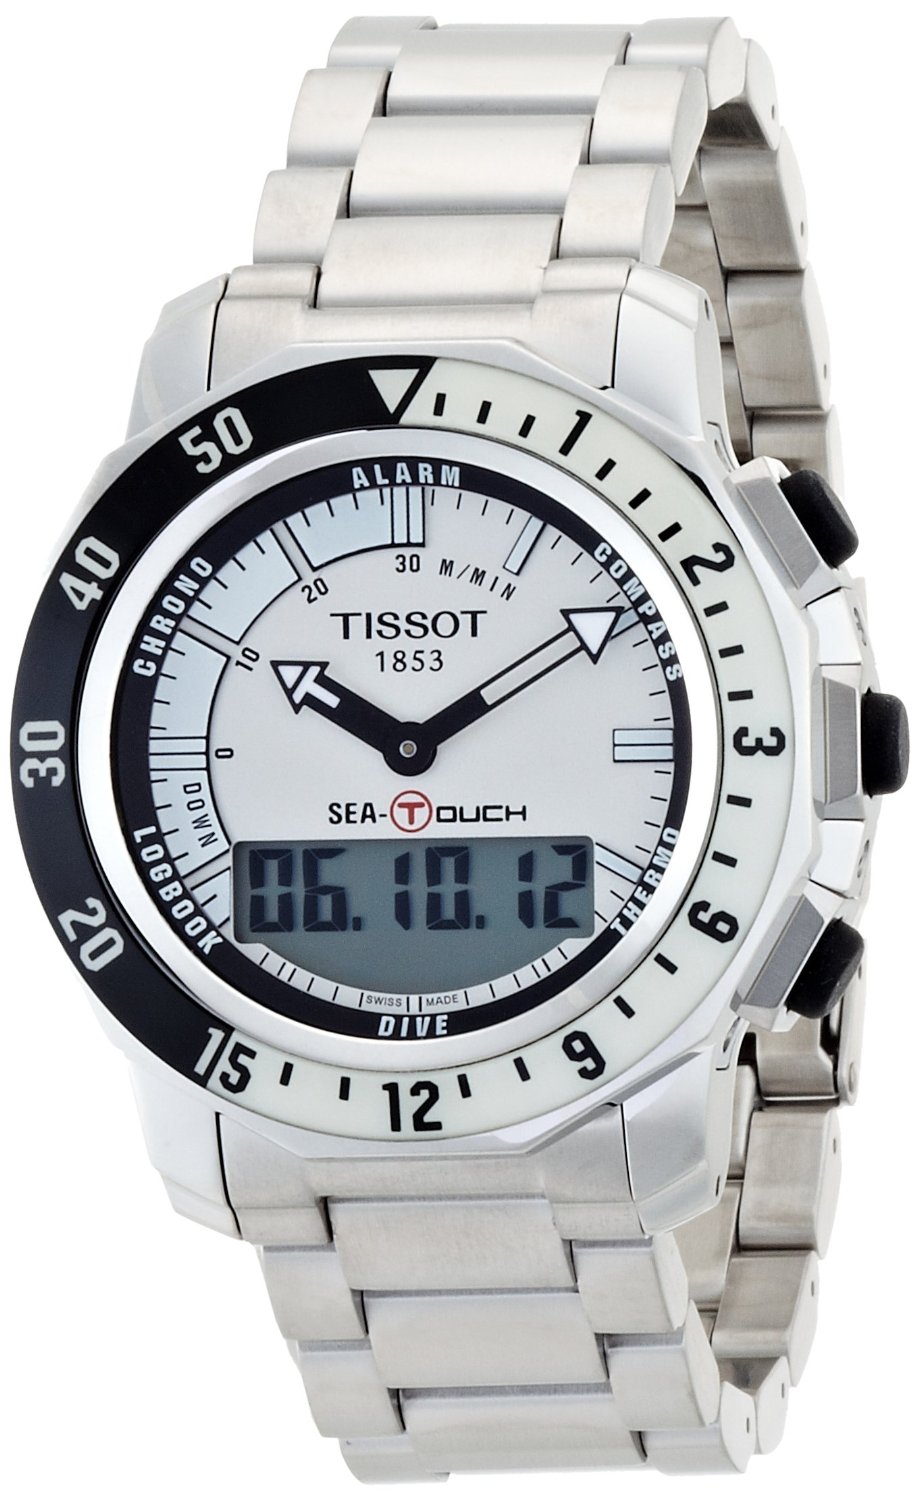 Tissot Men's T0264201103100 Sea Touch Quartz Chronograph Touch Screen White Dial Watch, only $498.99, free shipping